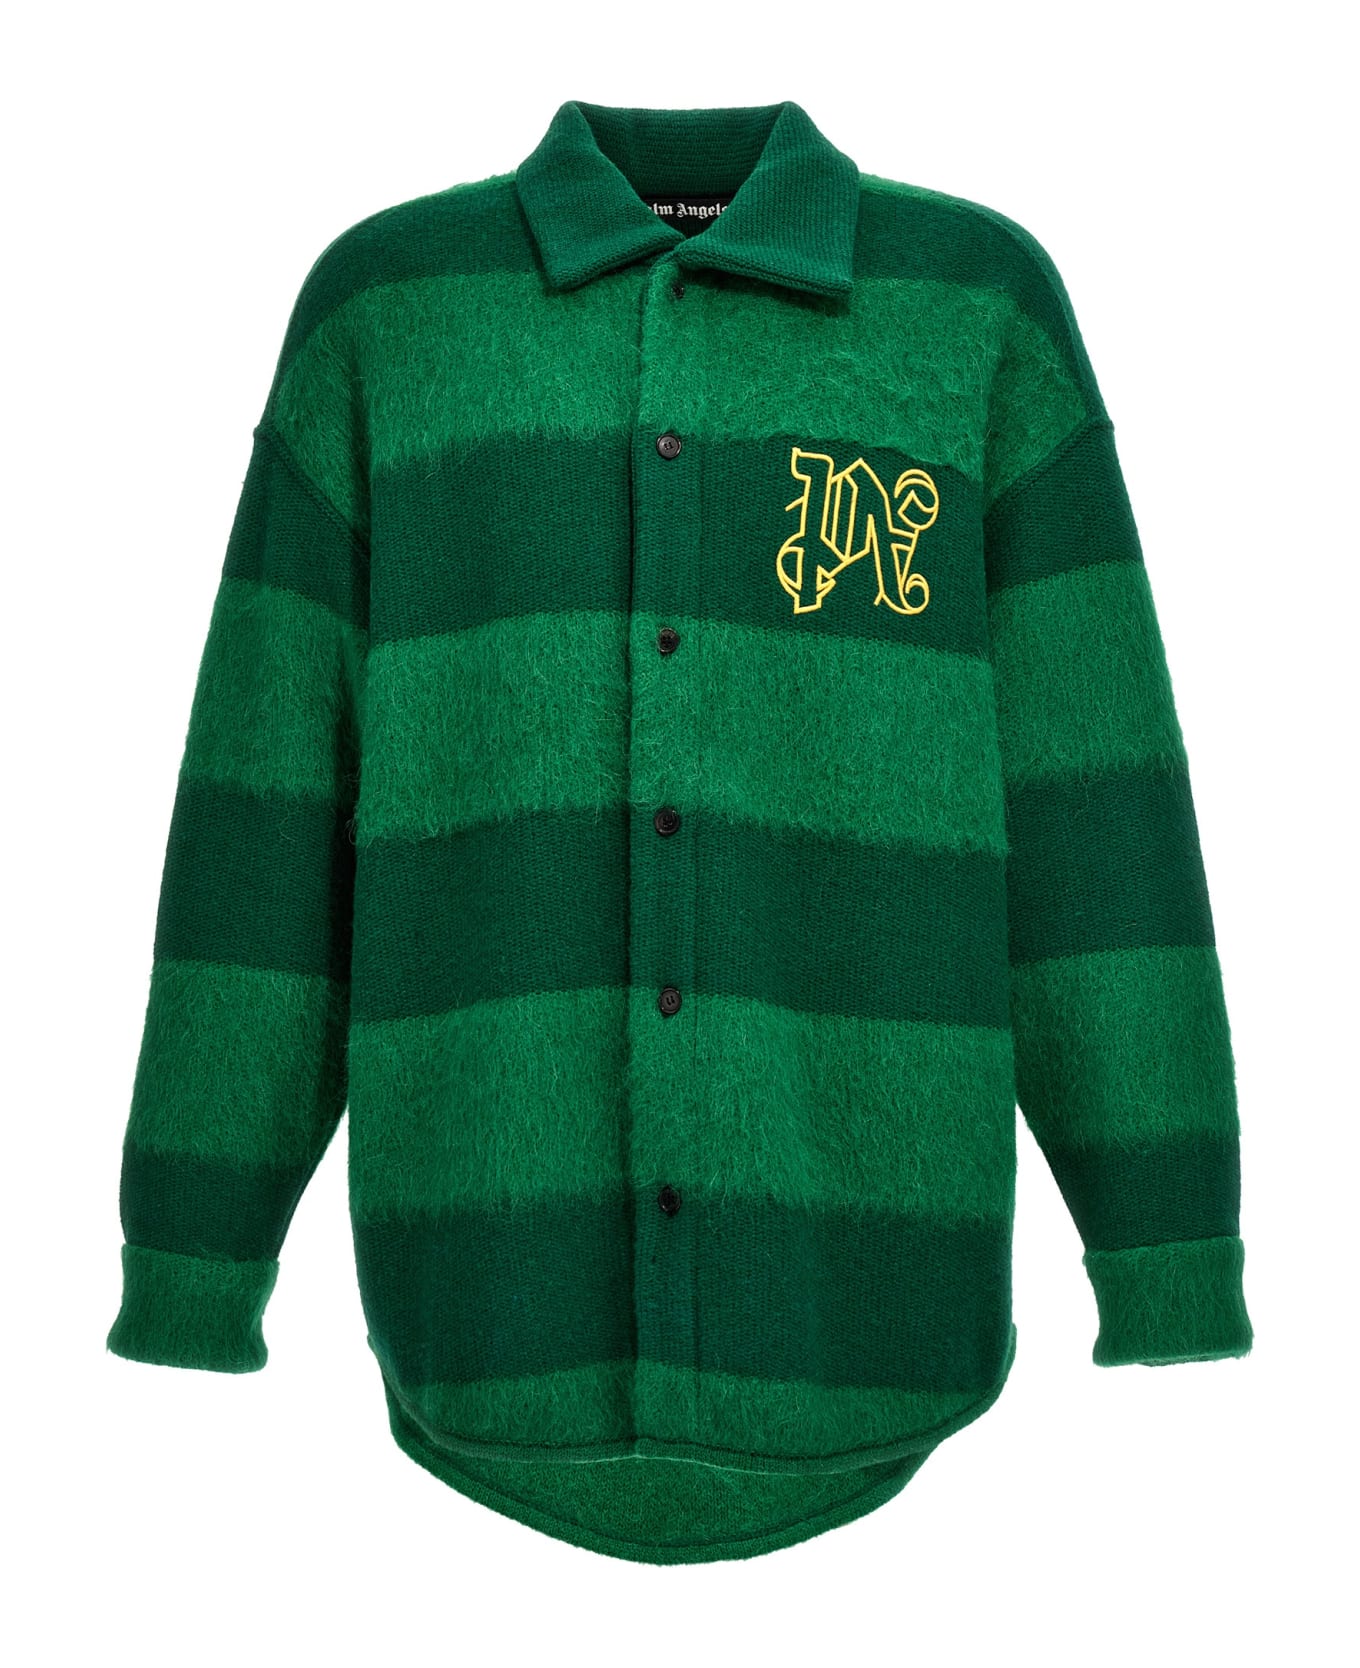 Palm Angels Rugby Overshirt - Green